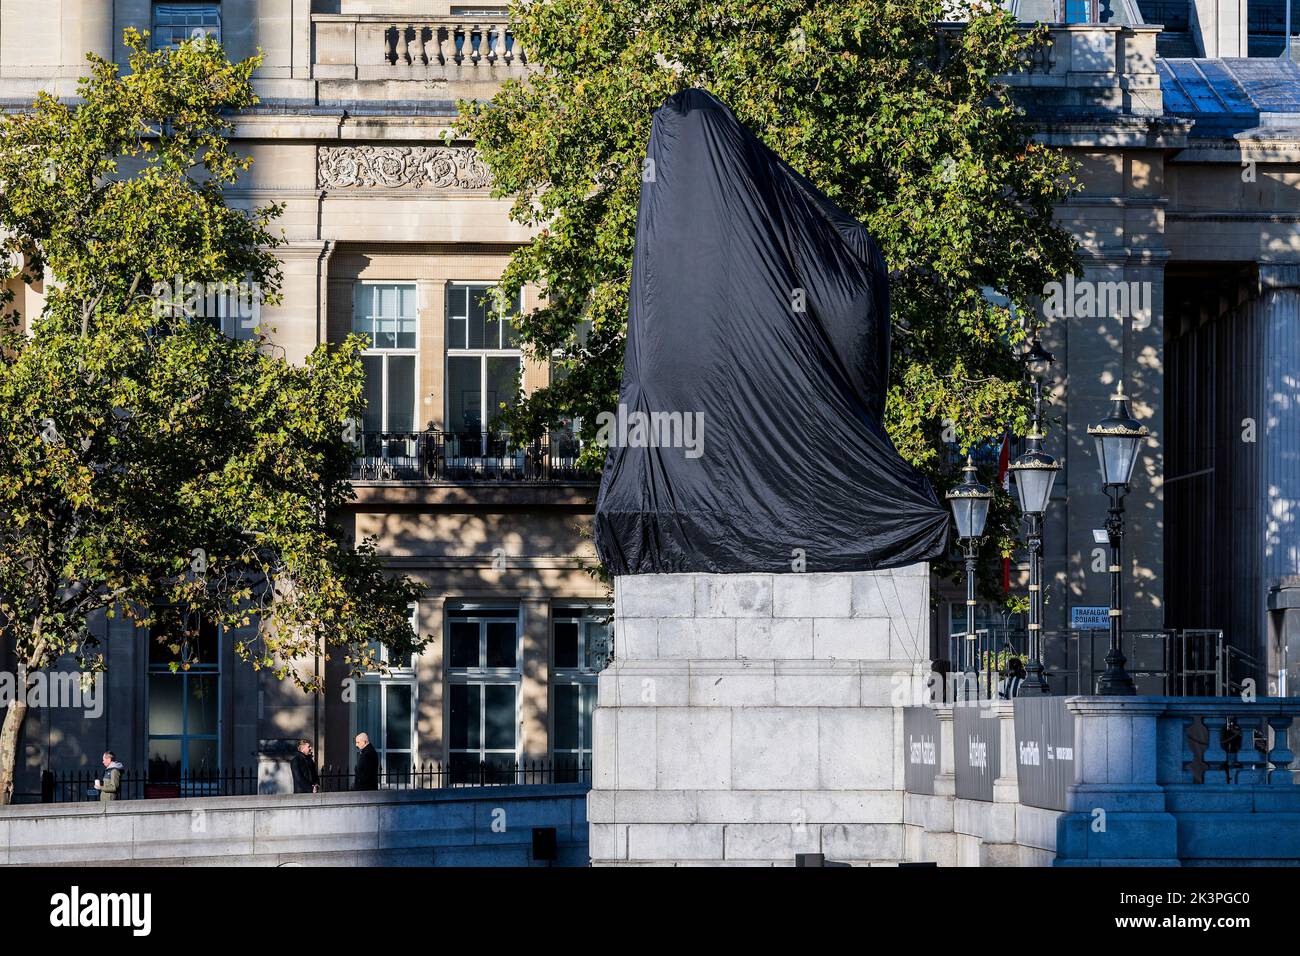 London, UK. 28th Sep, 2022. Shrouded in black and awaiting its unveiling - Antelope by Samson Kambalu on the Fourth Plinth in Trafalgar Square. Credit: Guy Bell/Alamy Live News Stock Photo